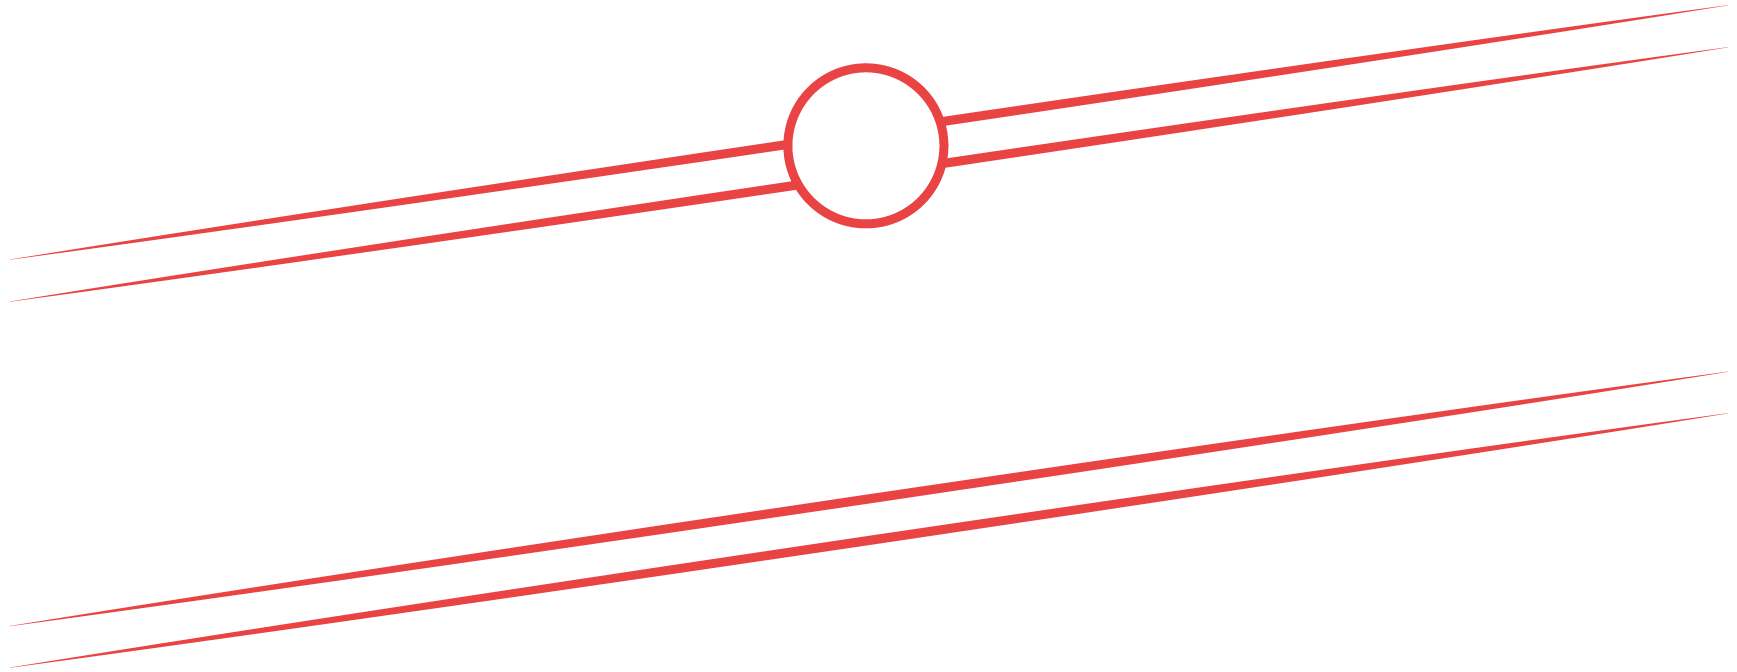 Download for free